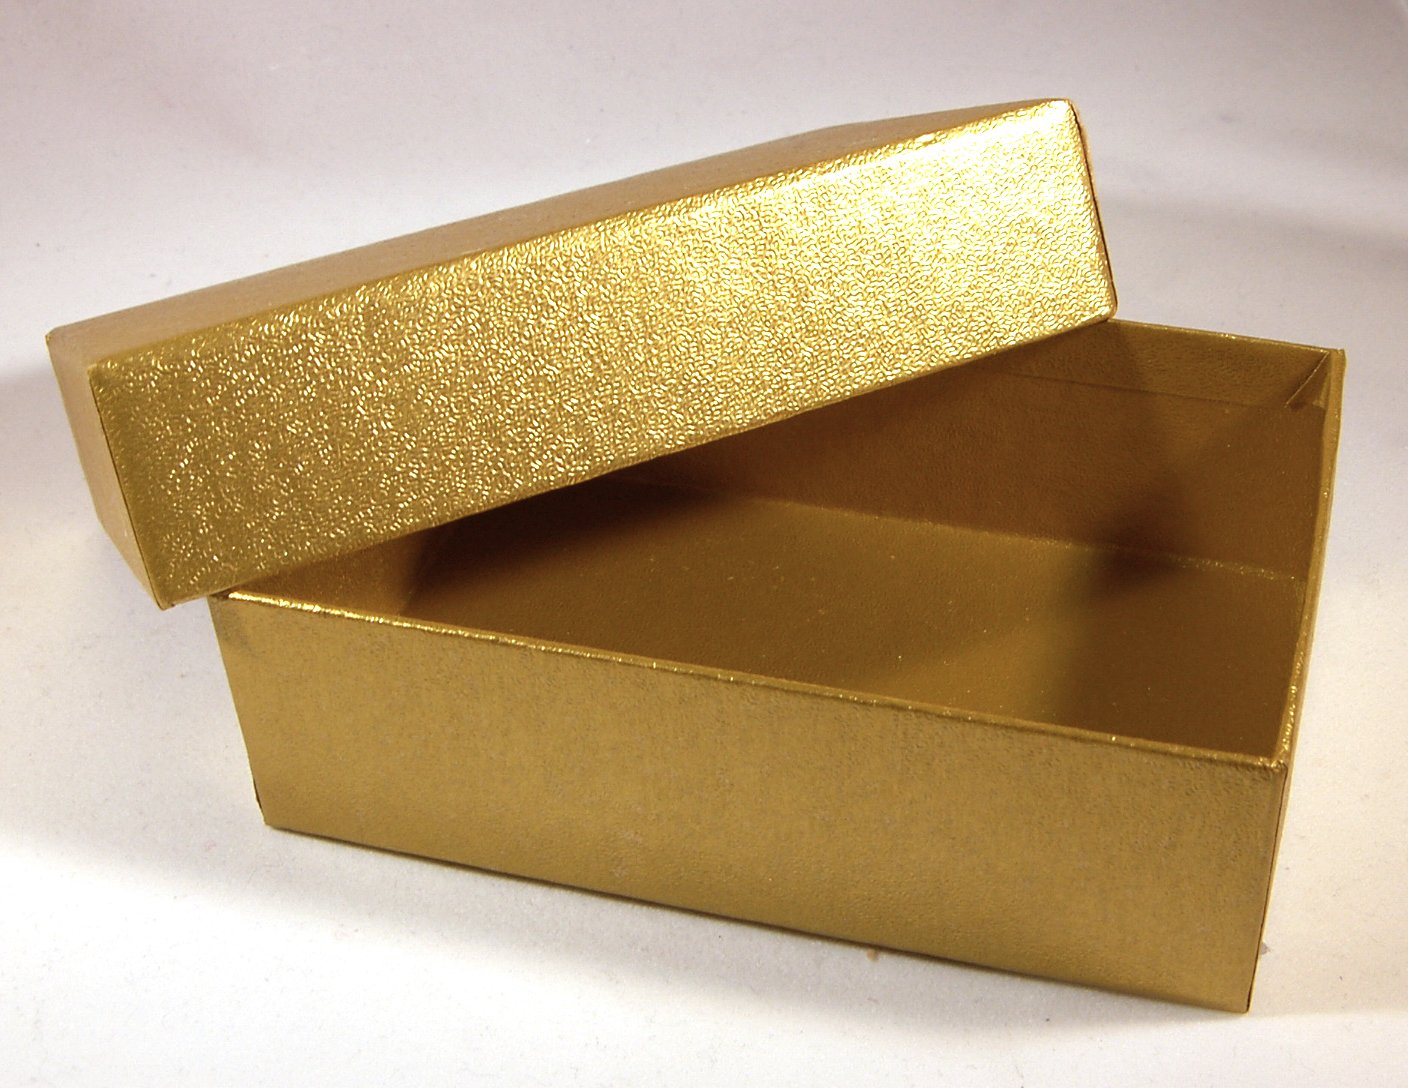 a large, shiny gold gift box on a white background